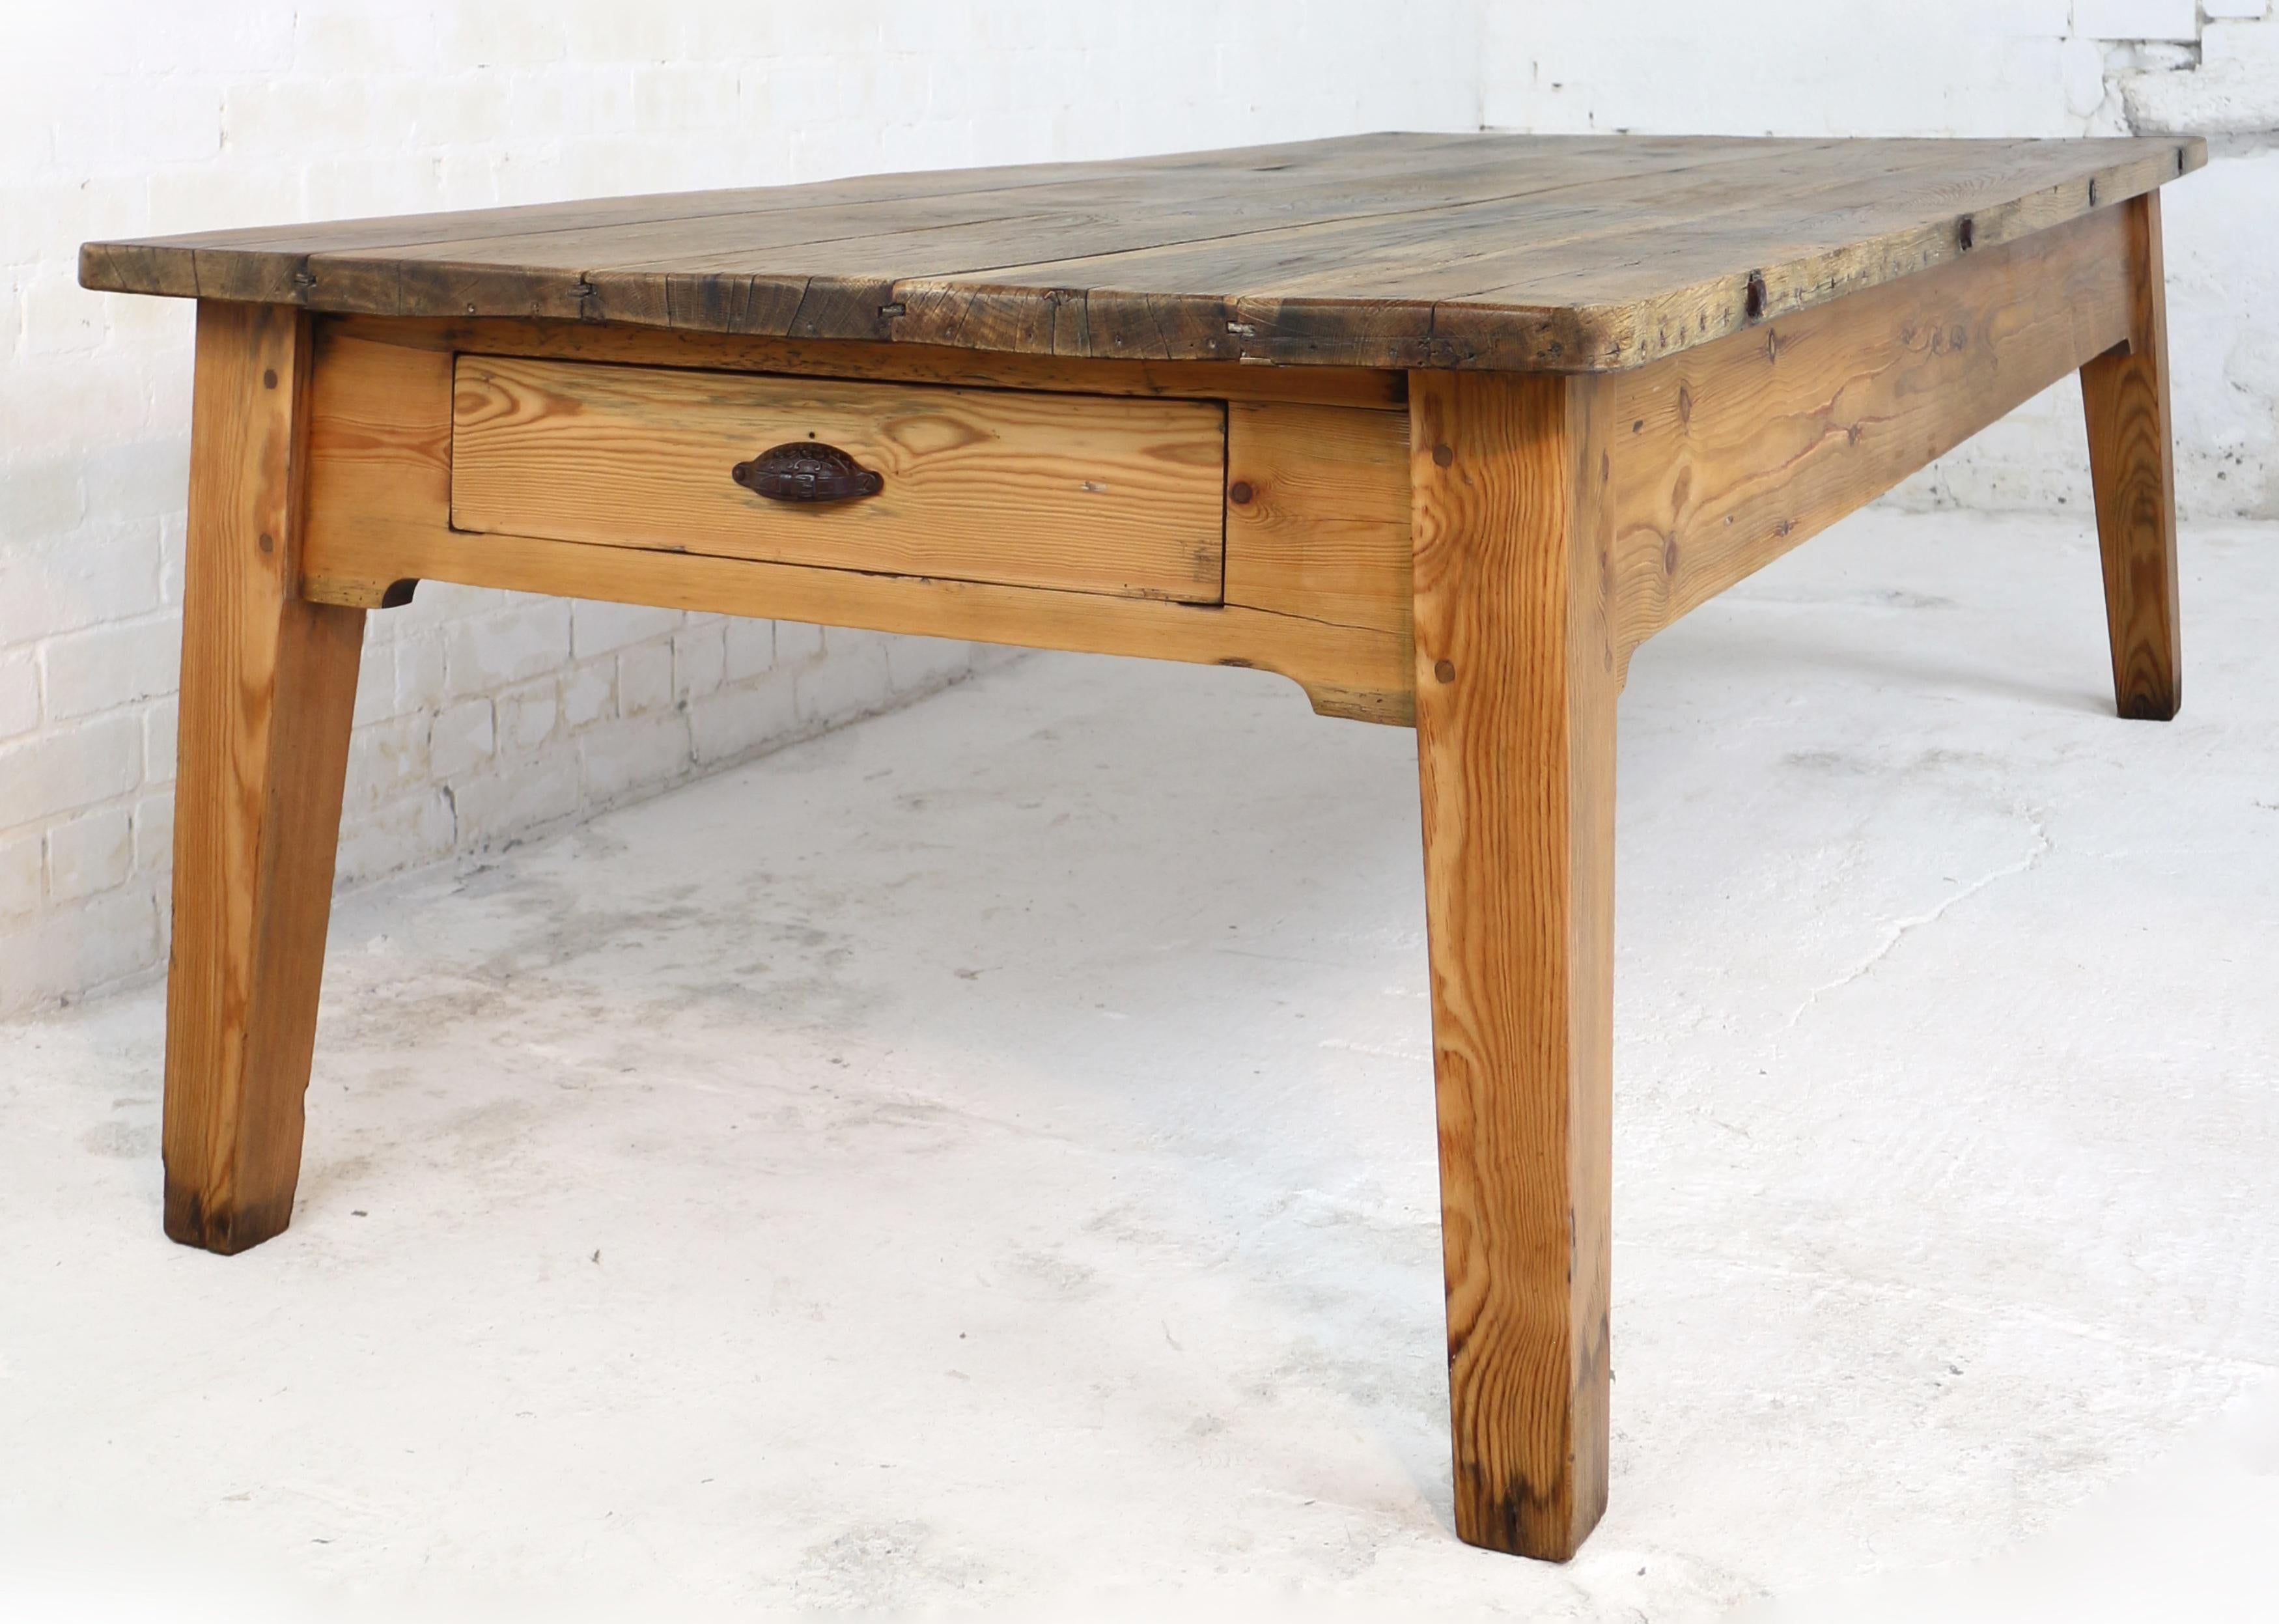 A superb large Scottish Estate preparation table with a planked oak top and pitch pine base on stout outsplayed tapering legs. With five 1½in thick oak planks to the top, the pitch pine base of pegged construction with a shaped apron, single drawer